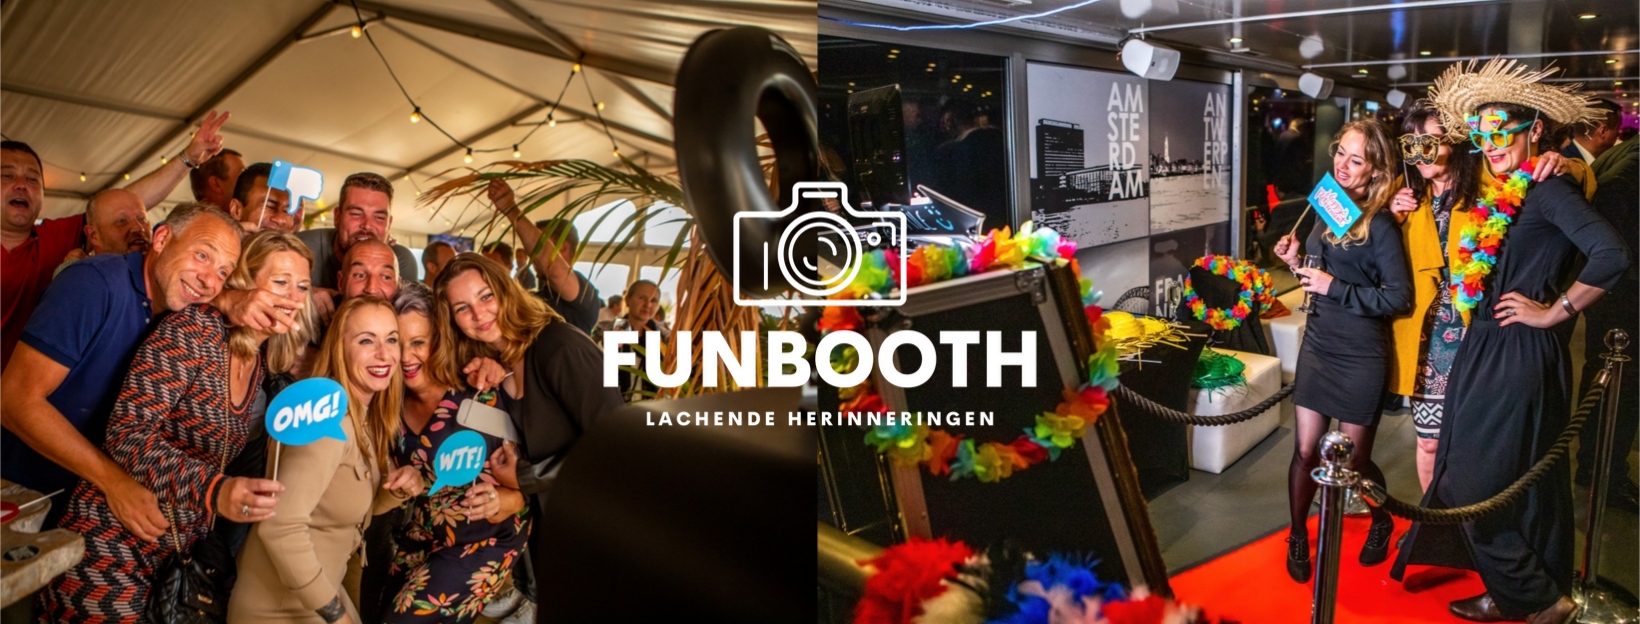 fotografen Sint-Andries Funbooth